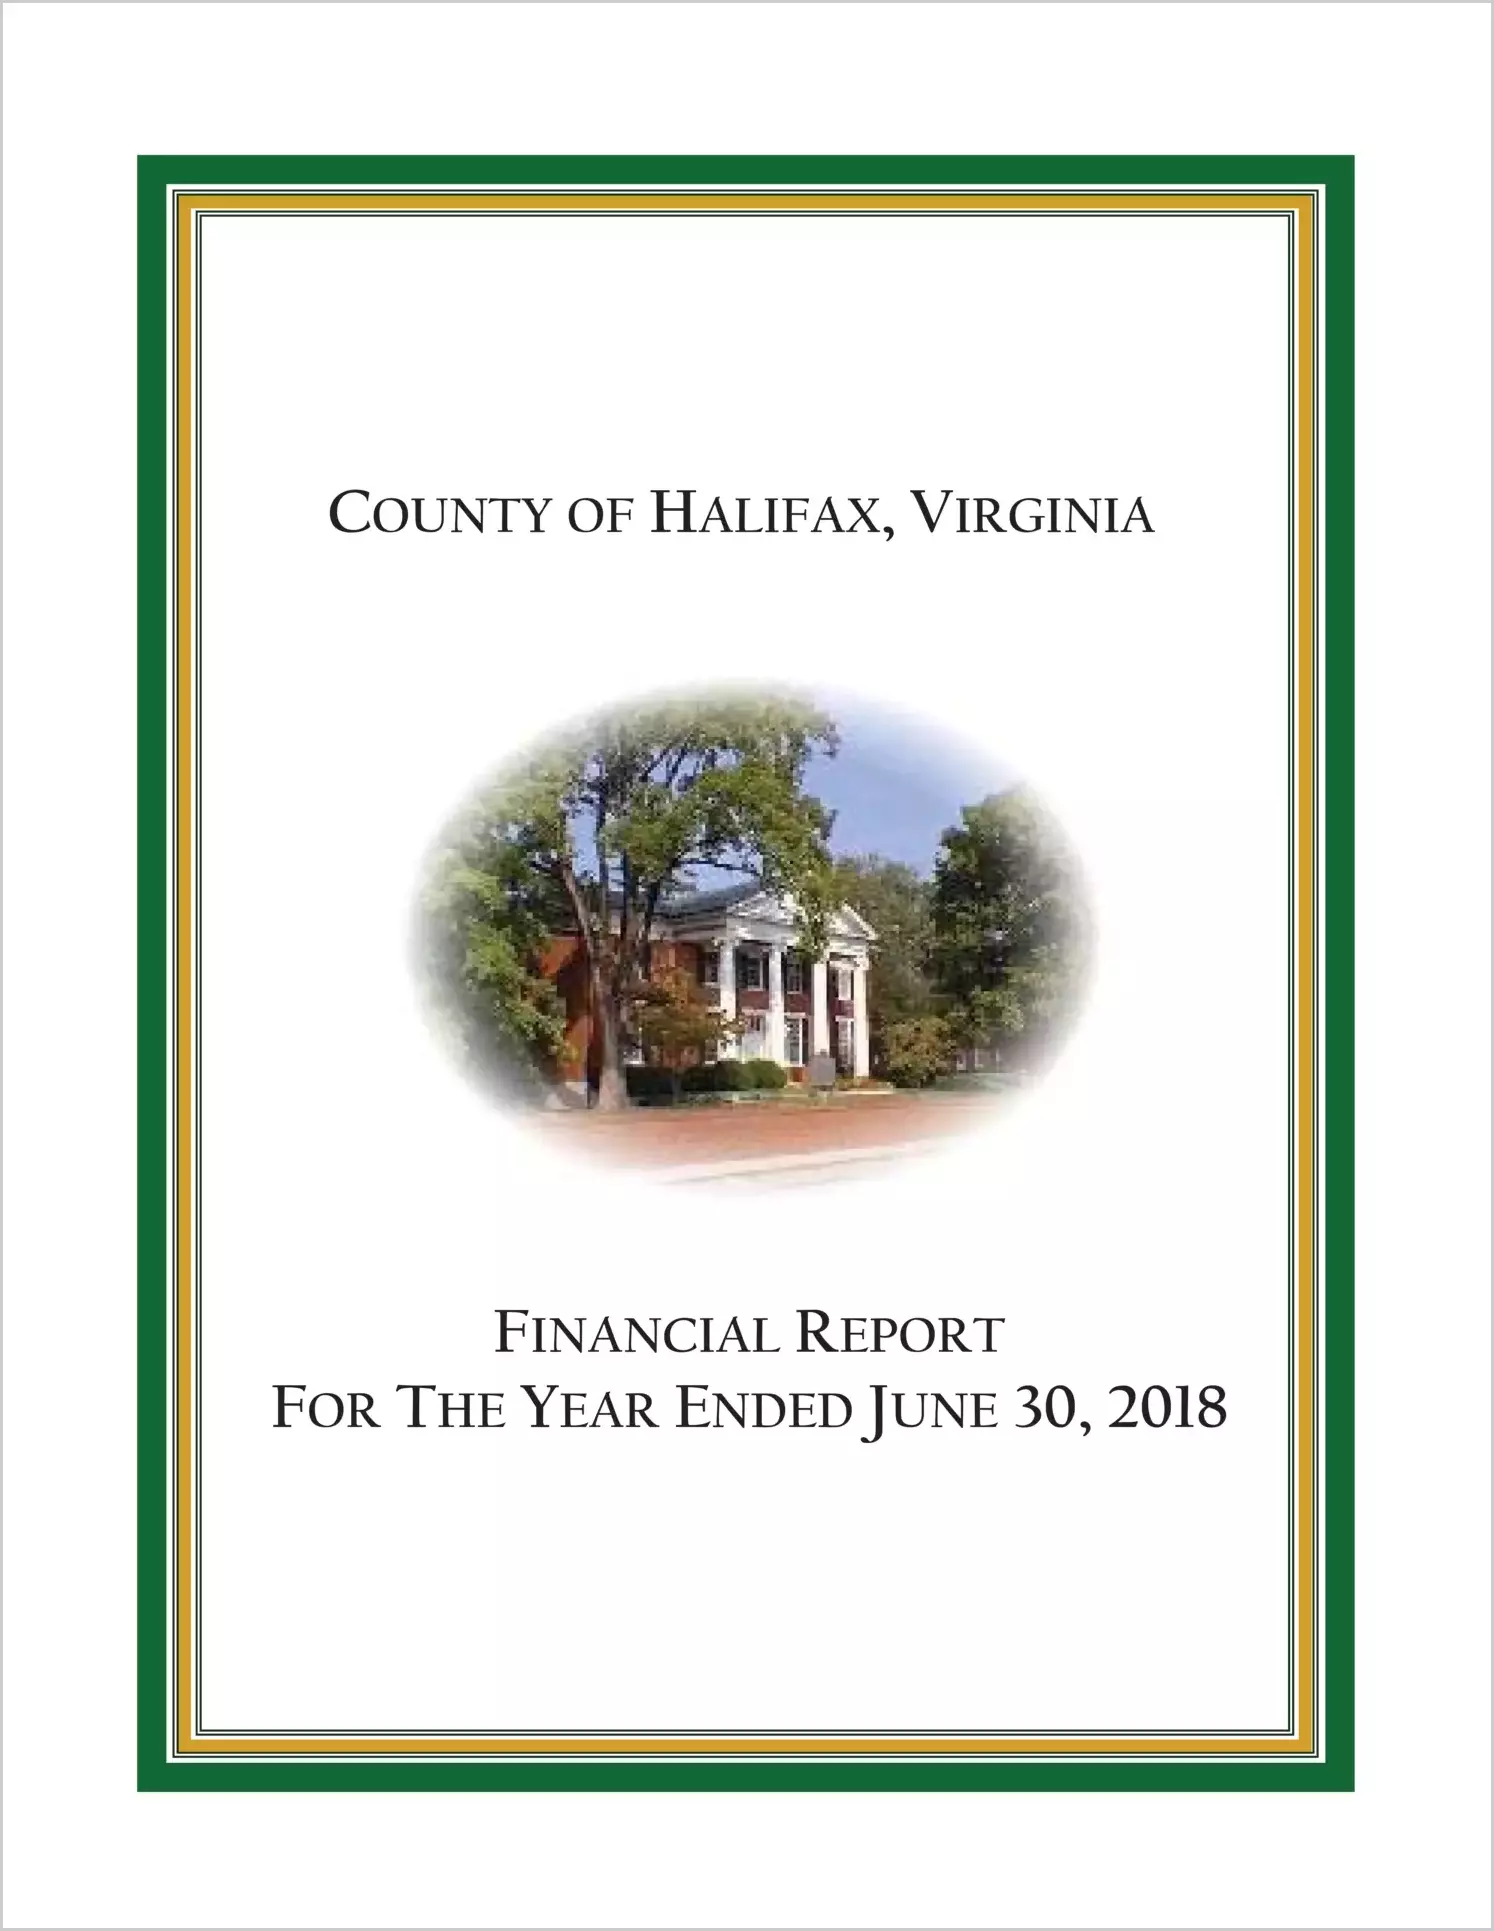 2018 Annual Financial Report for County of Halifax